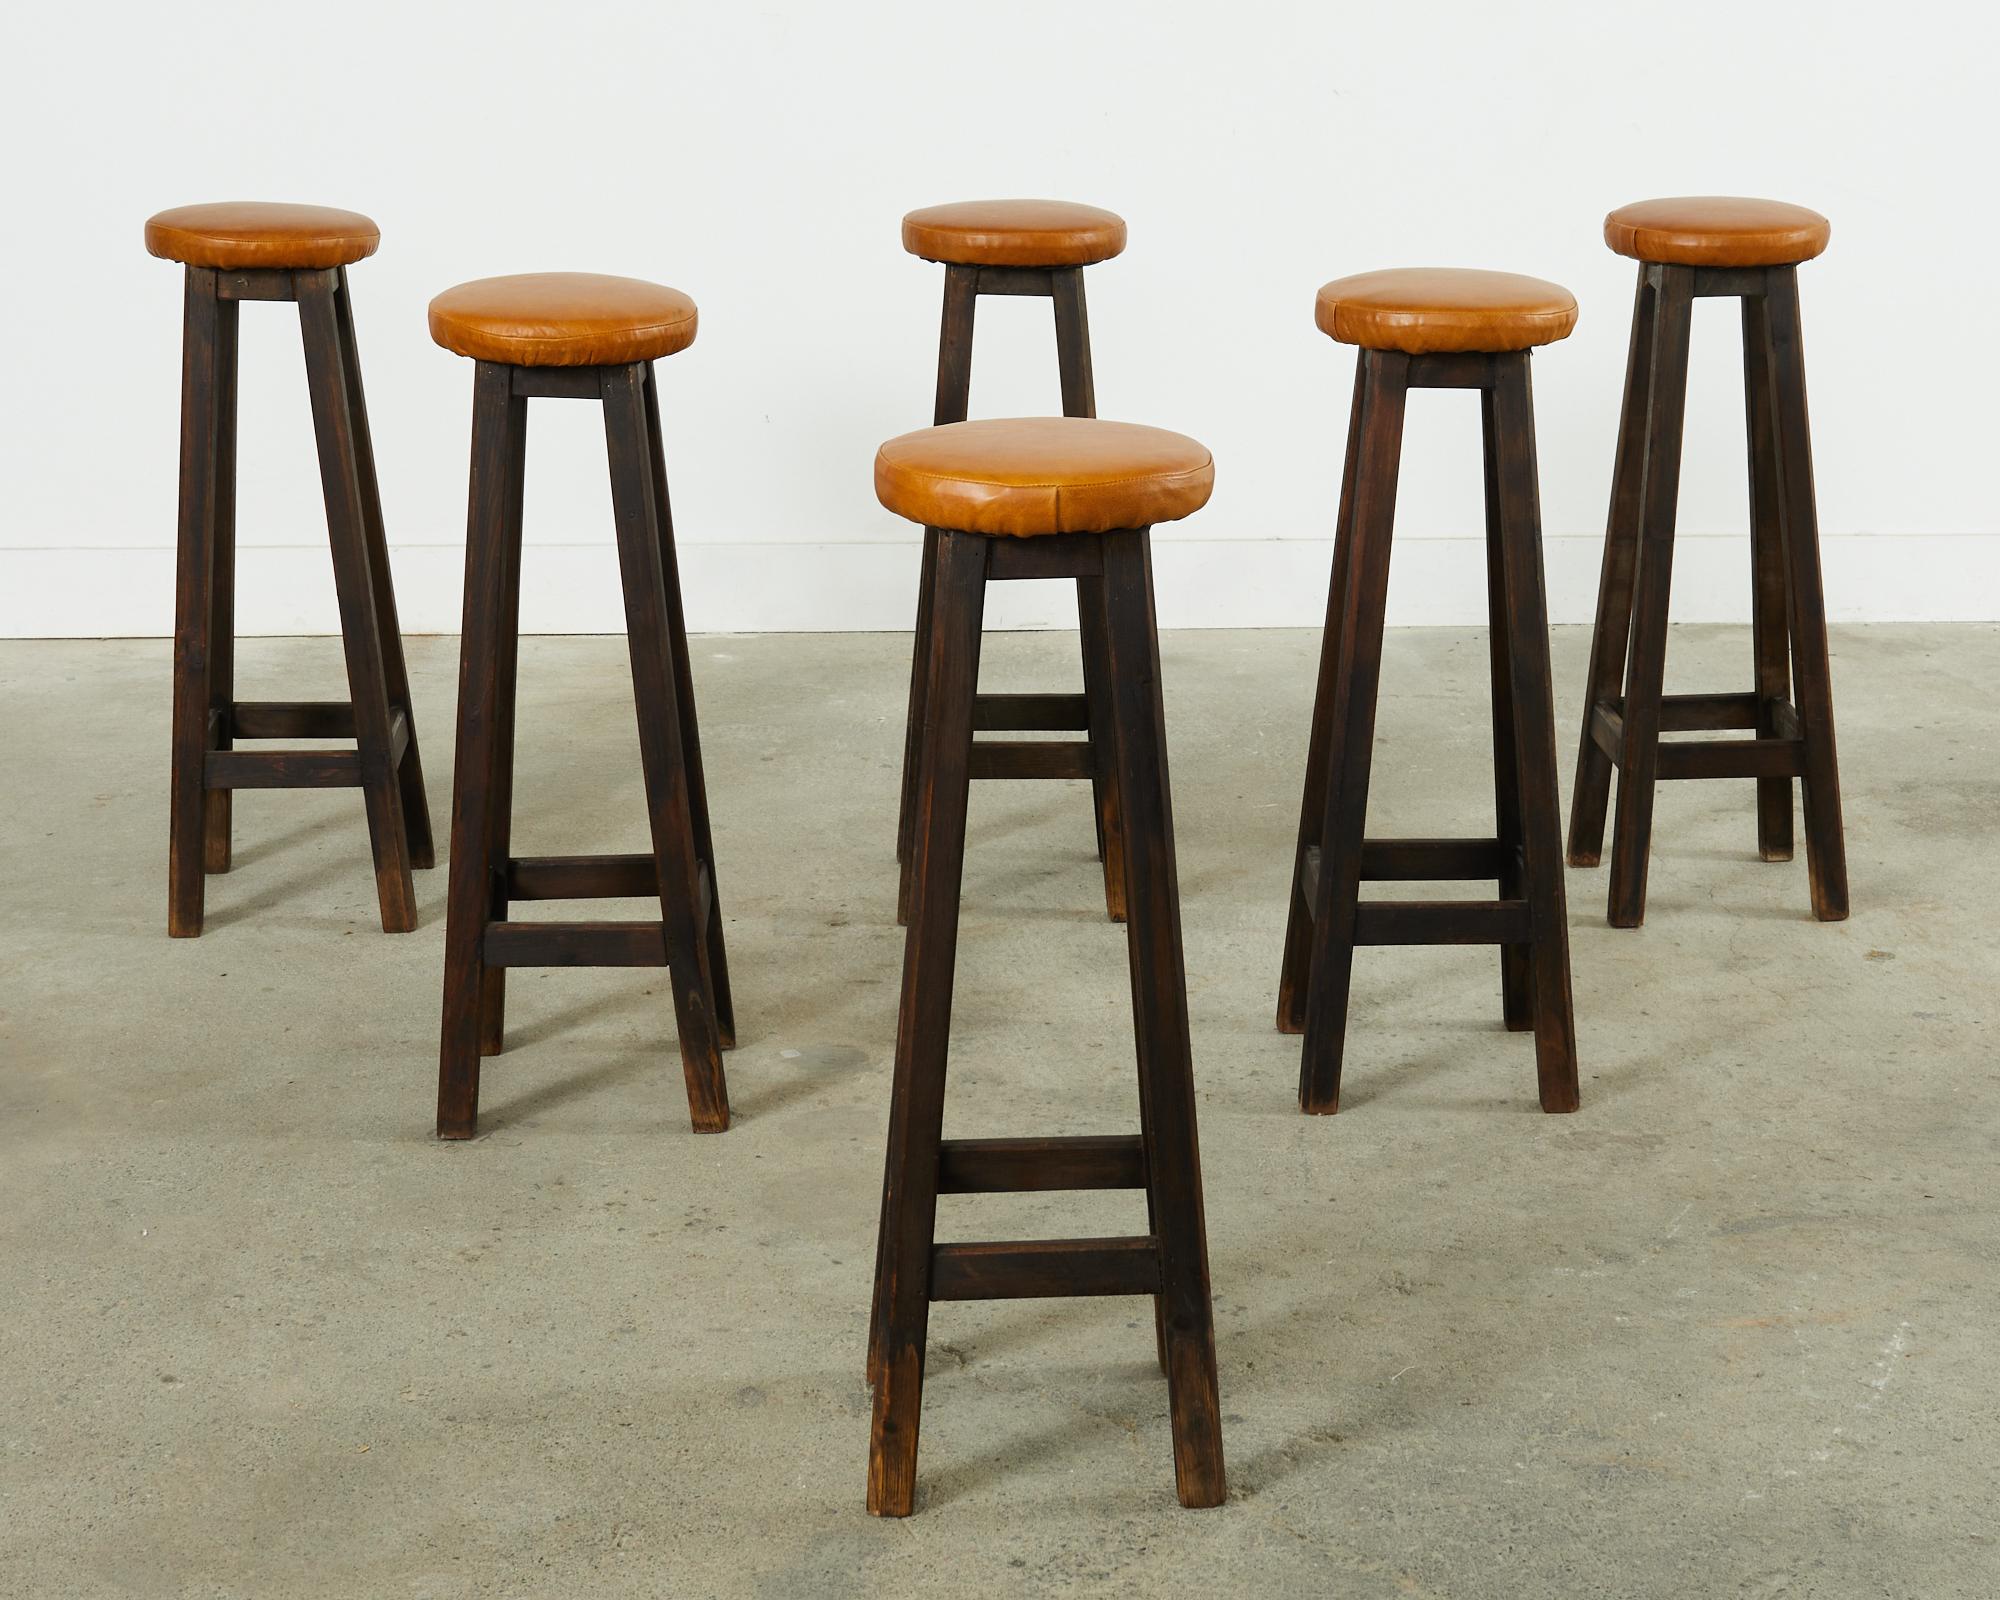 Rustic set of six matching pub style barstools featuring tall, narrow frames, crafted from oak with chambered legs conjoined by stretchers. Dark finish on the oak has an aged, faded patina. Topped with newly upholstered thick leather hide covered